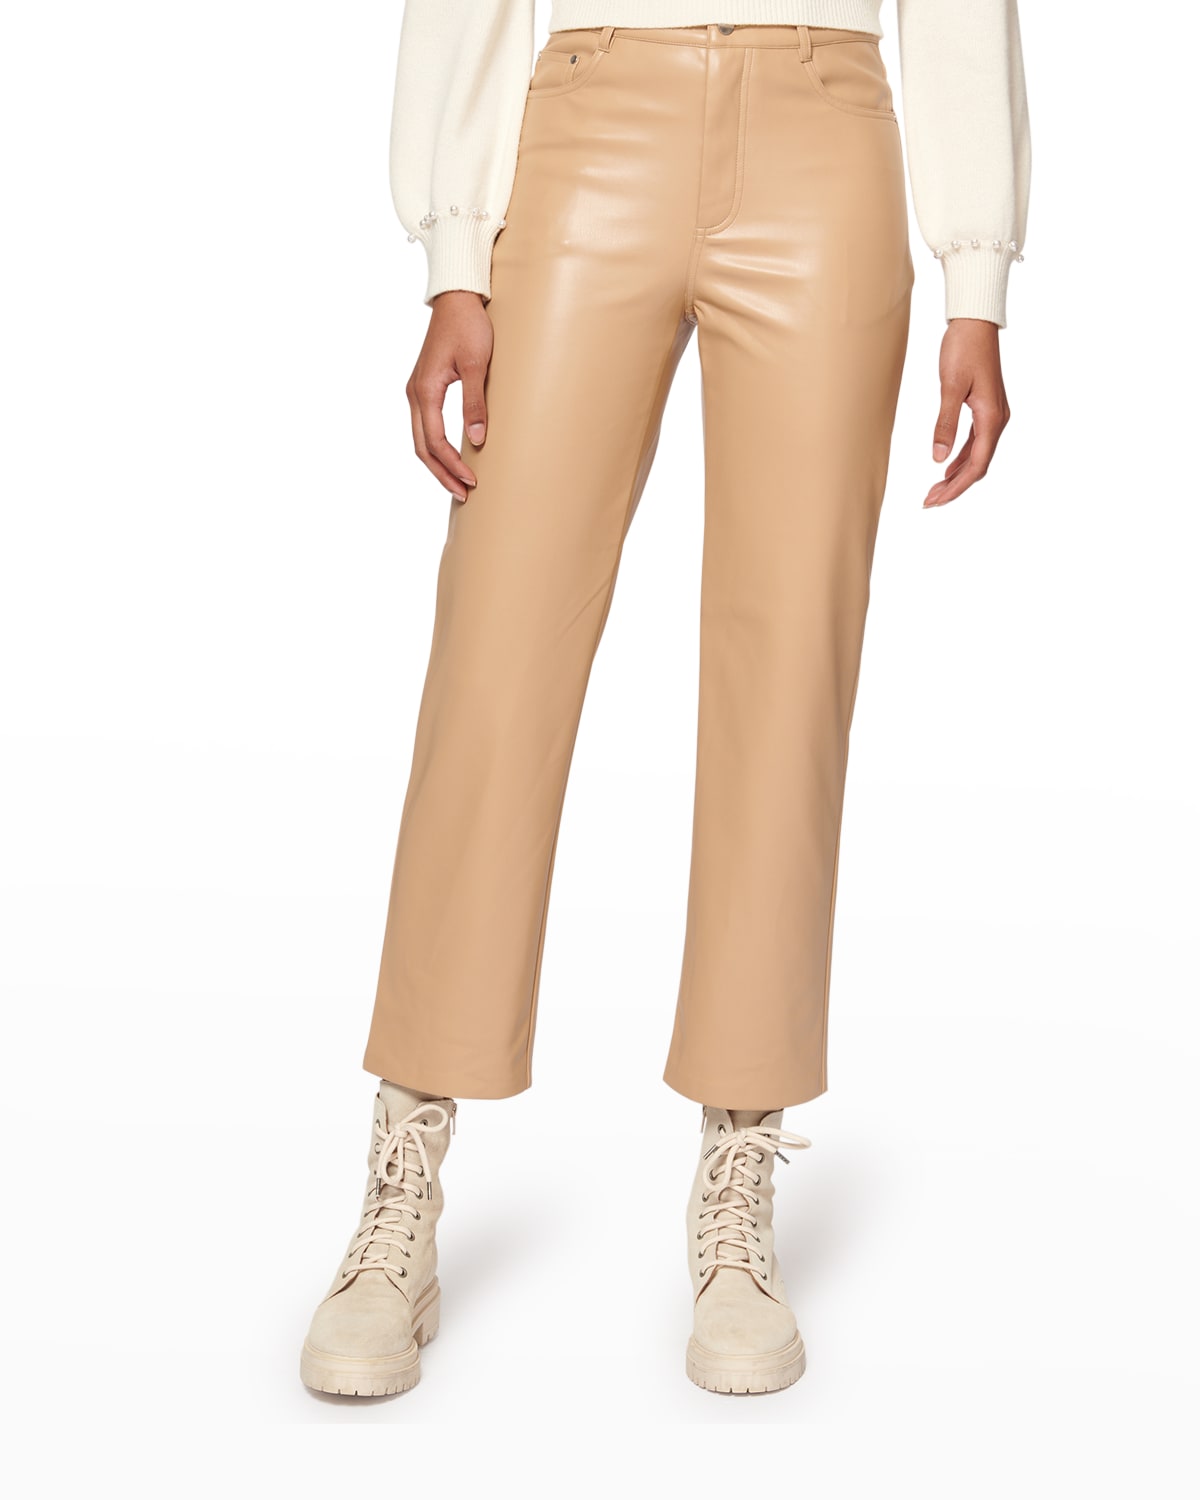 CAMI NYC HANIE CROPPED BOOTCUT VEGAN LEATHER PANTS